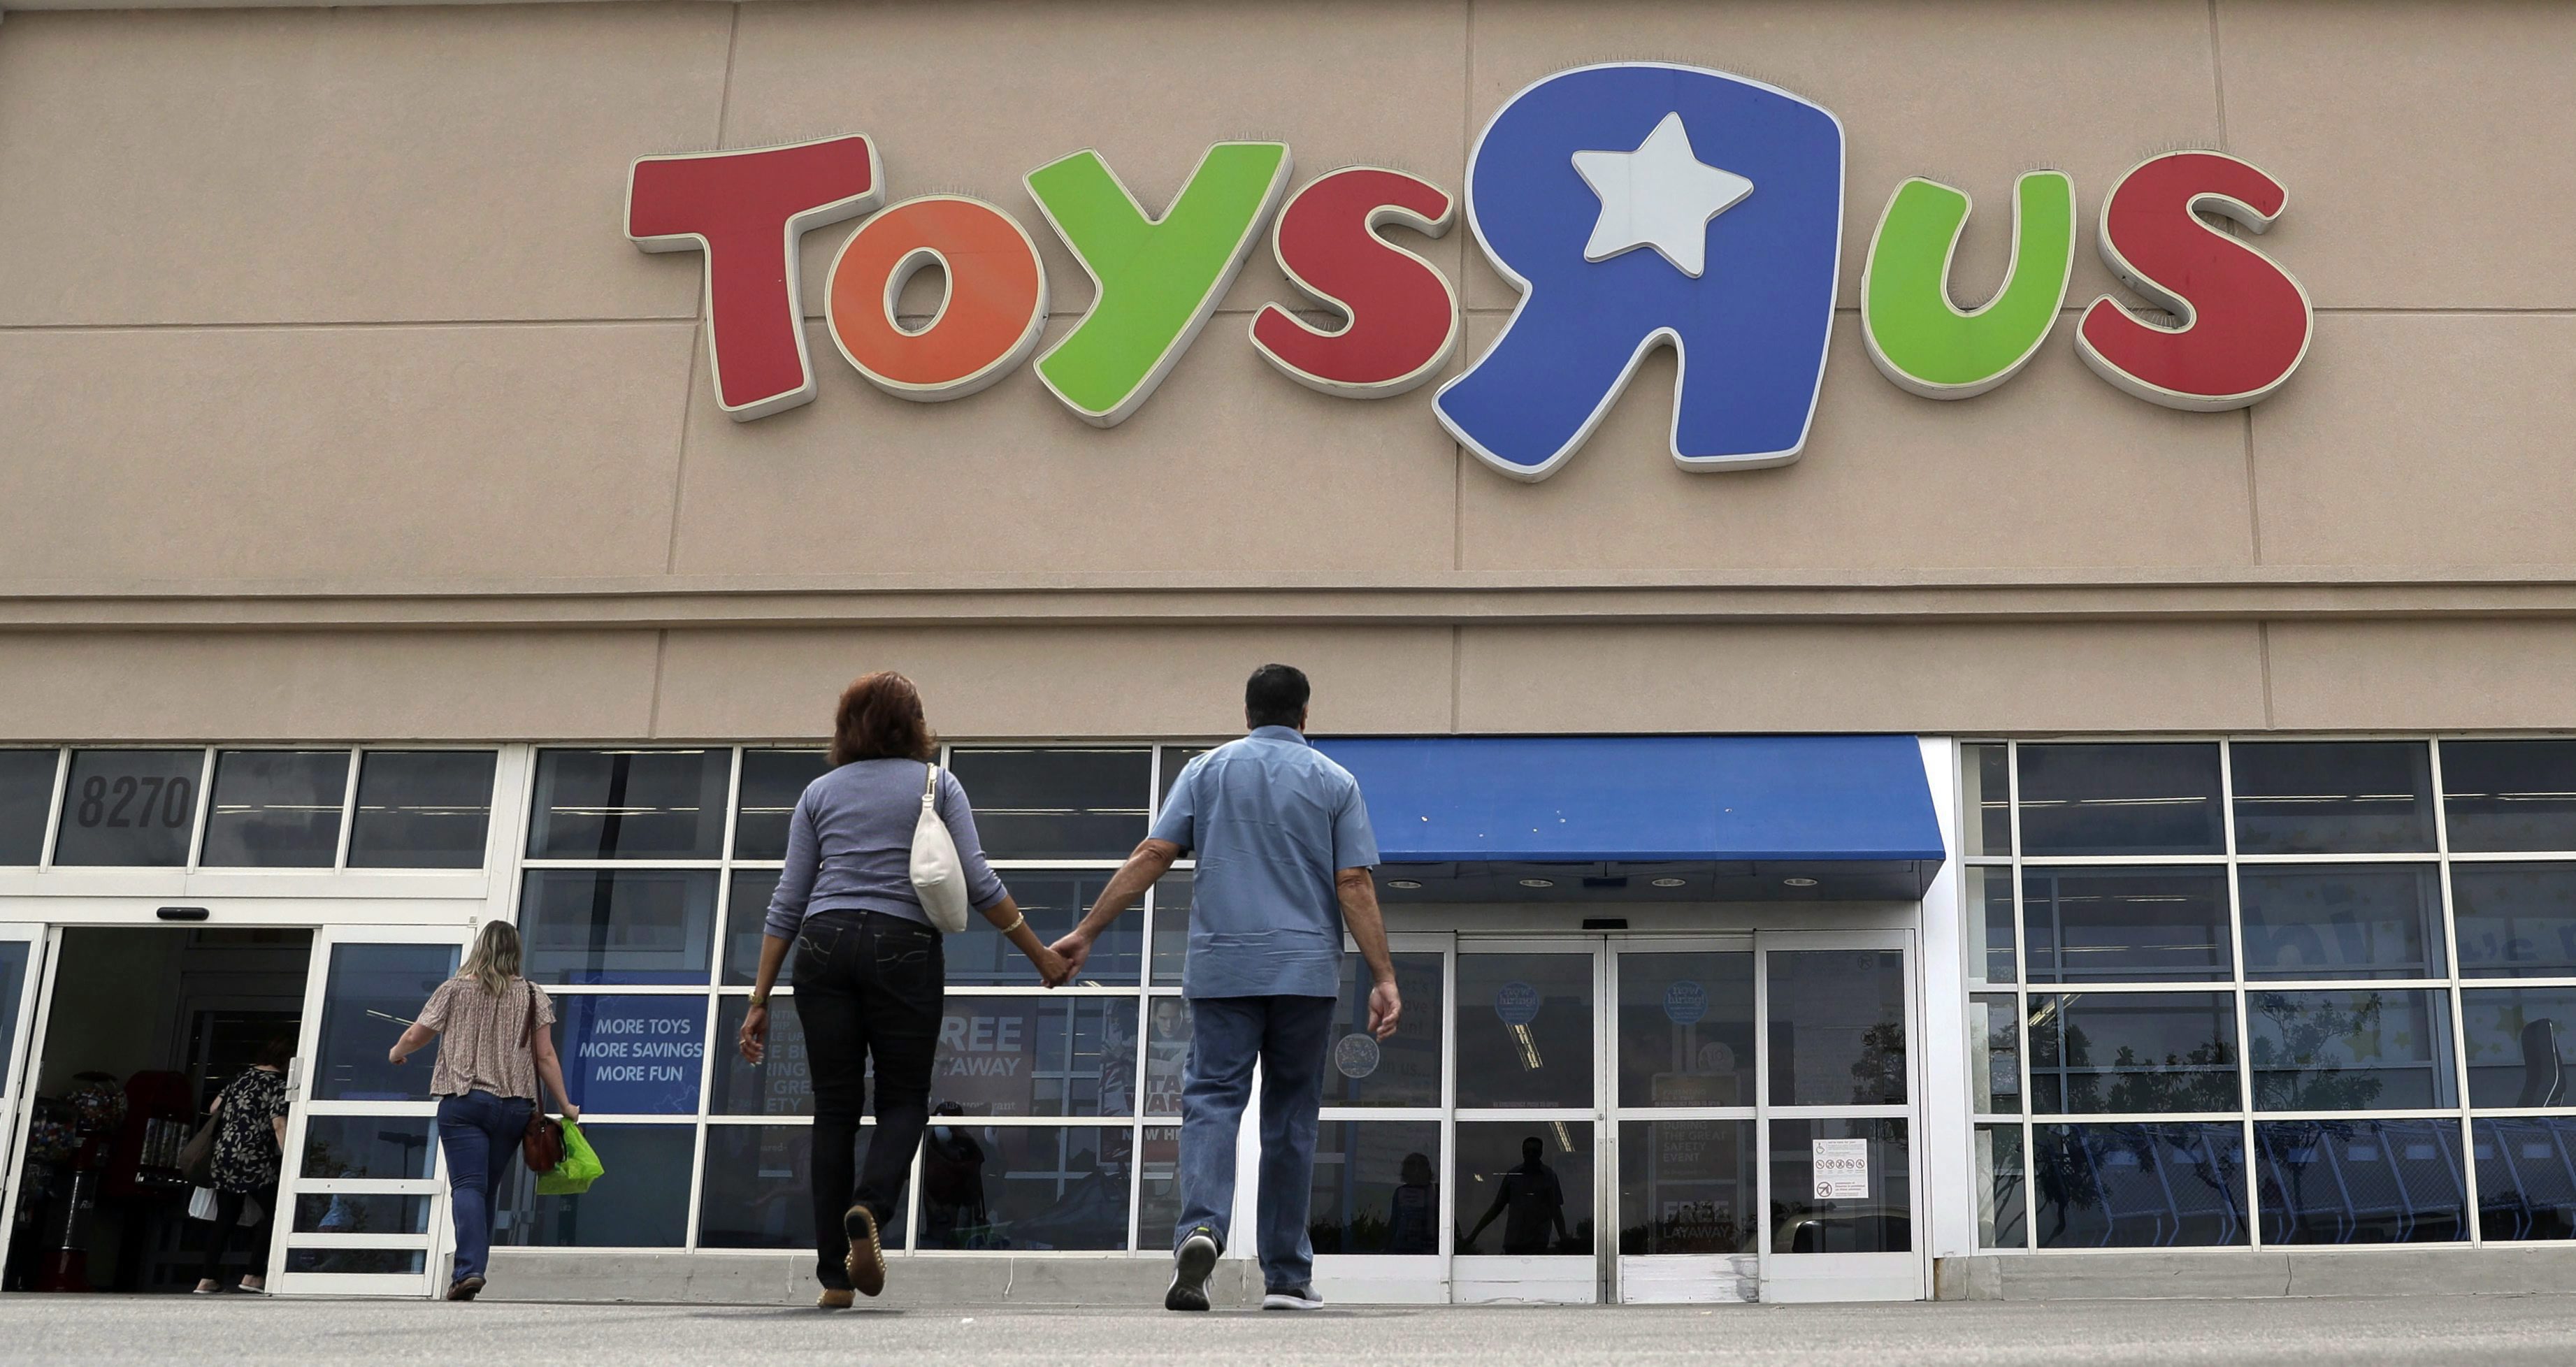 Weekly Store Openings and Closures Tracker 2018, Week 4: Toys“R”Us to Close  182 Stores; JCPenney to Close Four Stores